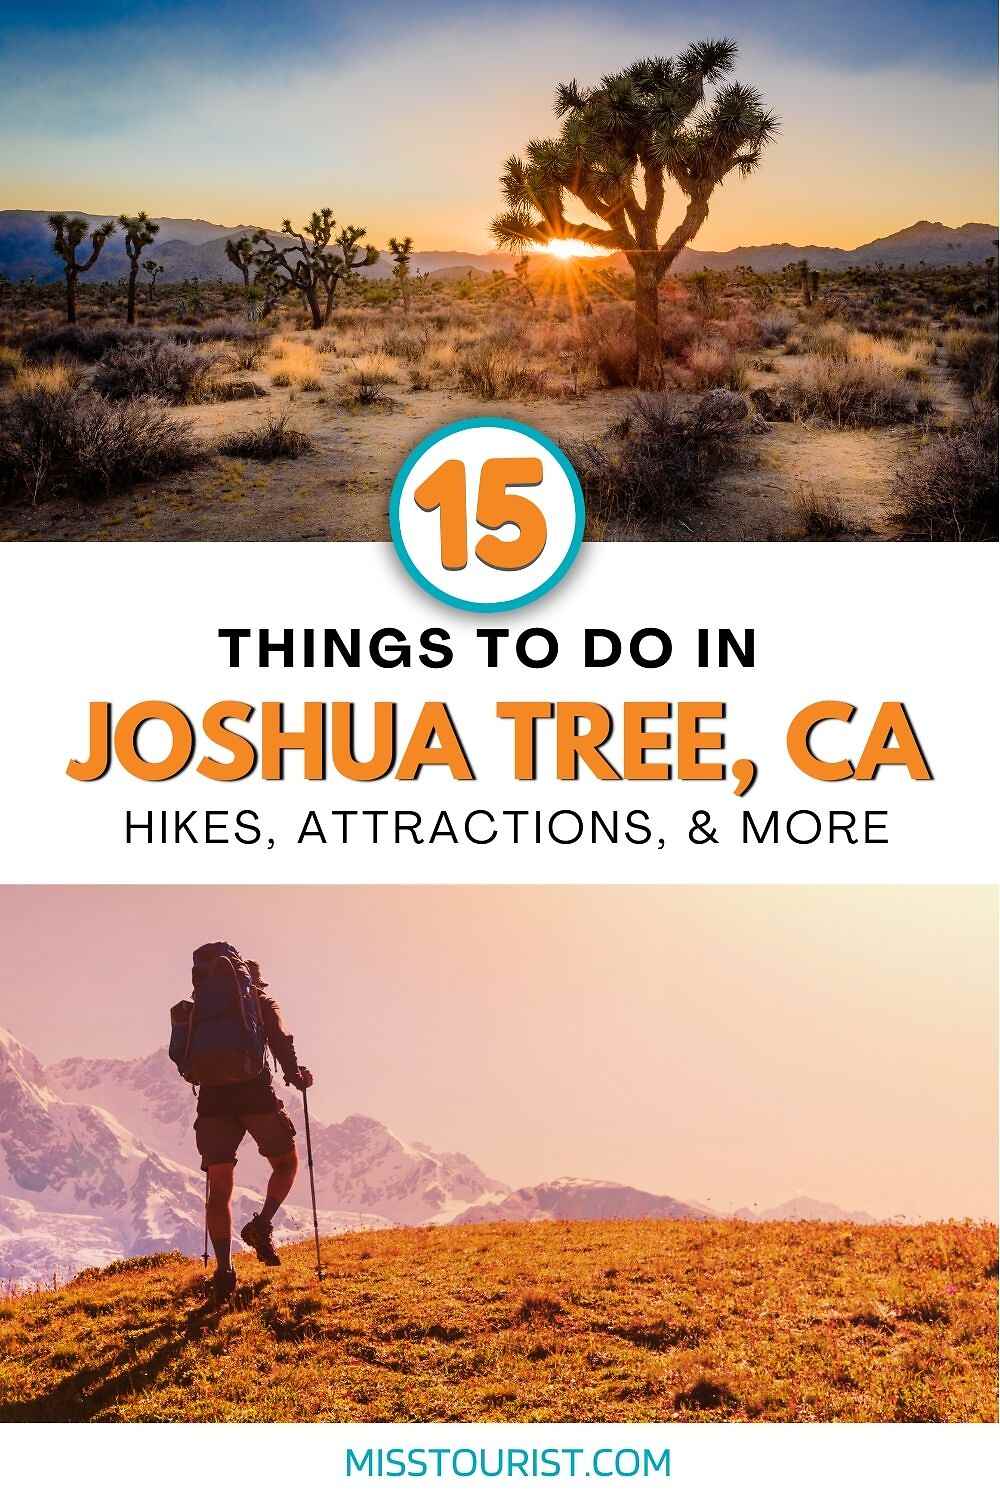 Collage of two pictures: sunset at Joshua Tree and a person hiking